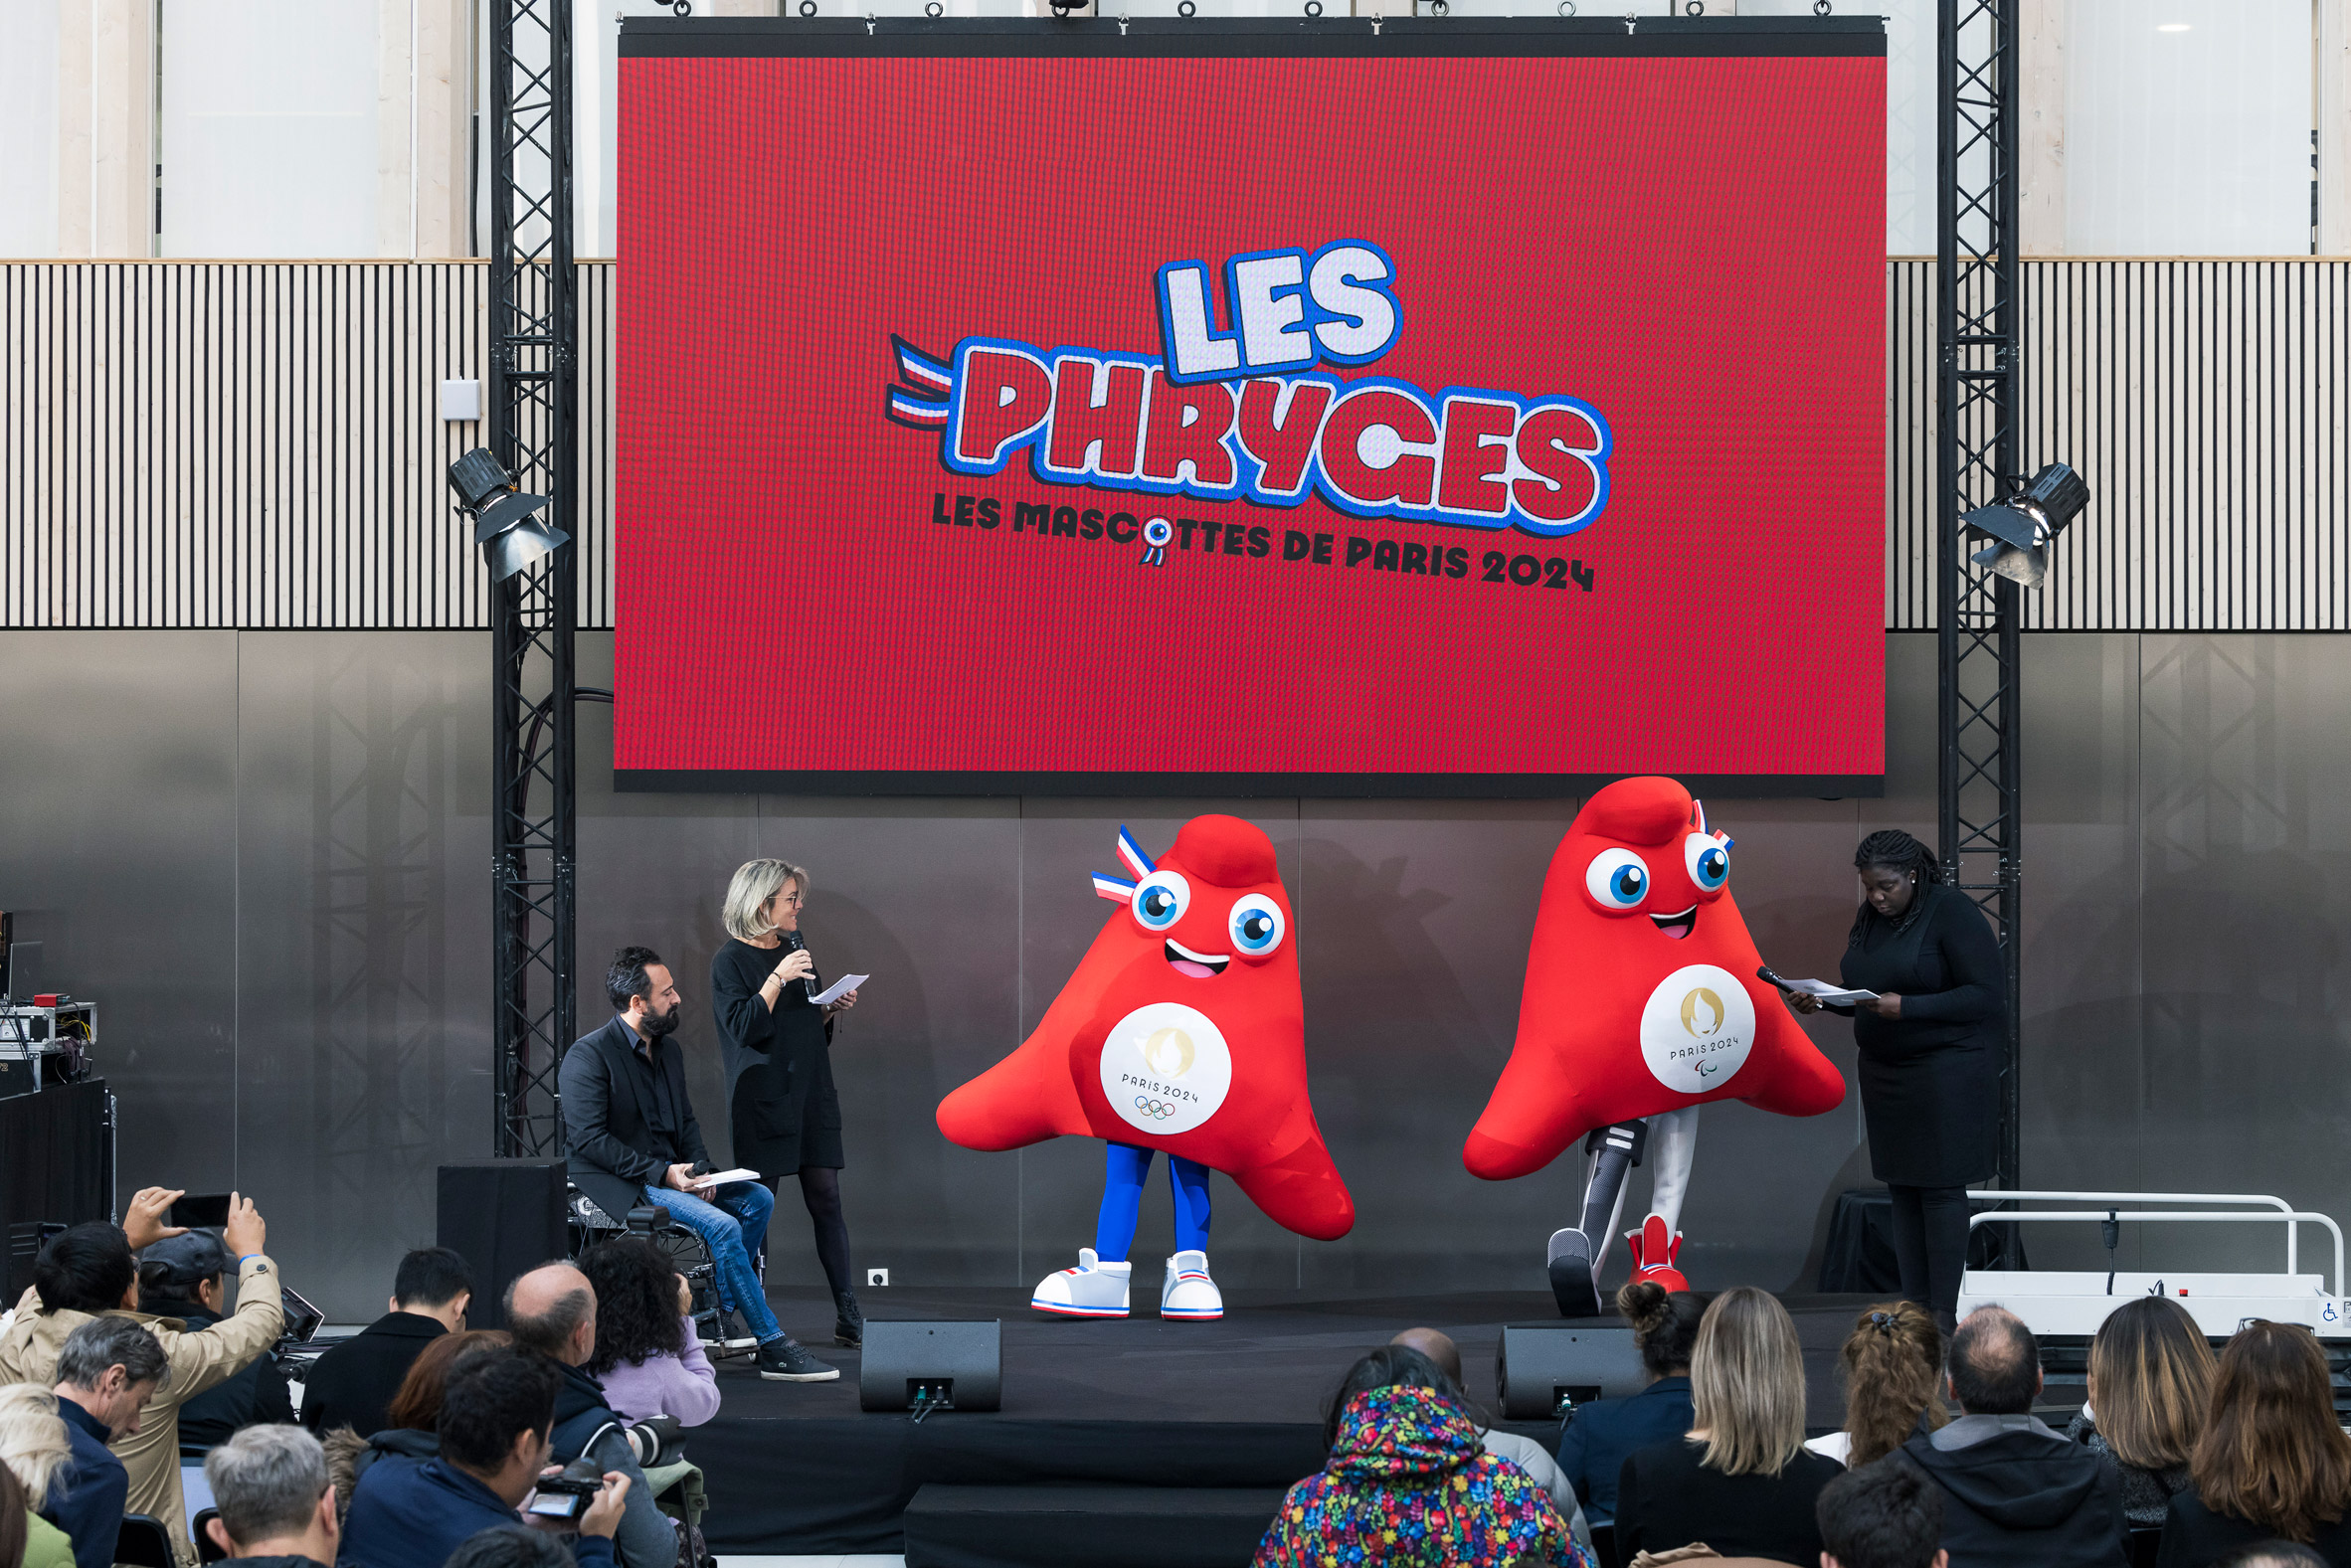 Paris Olympics Mascot: What Is The Meaning Of The Phryge?